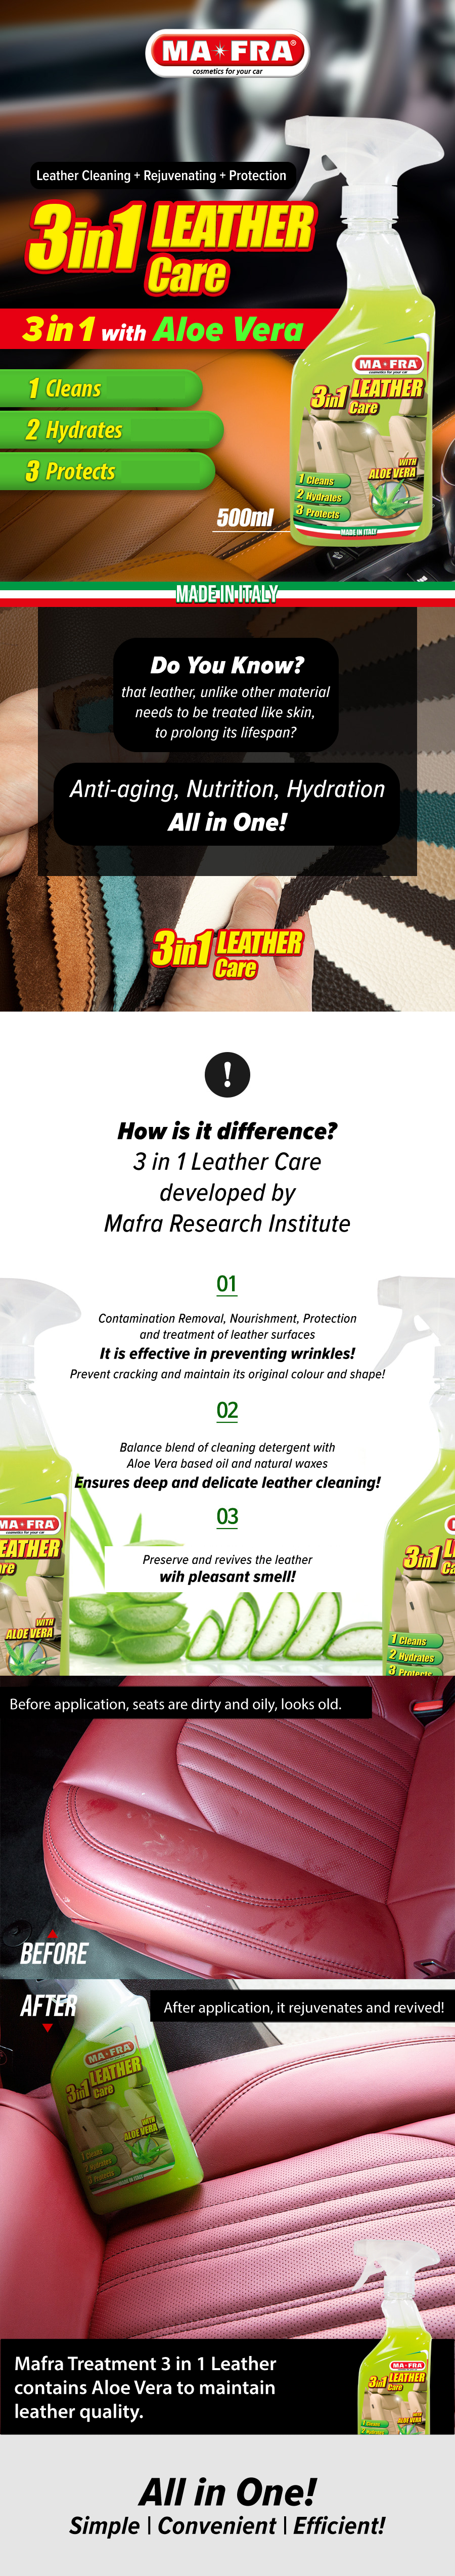 Mafra Treatment 3 in 1 Leather with Aloe Vera 500ml (Cleans Hydrates Protects car leather seats, anti aging and anti cracking formula) - Mafra Official Store Singapore